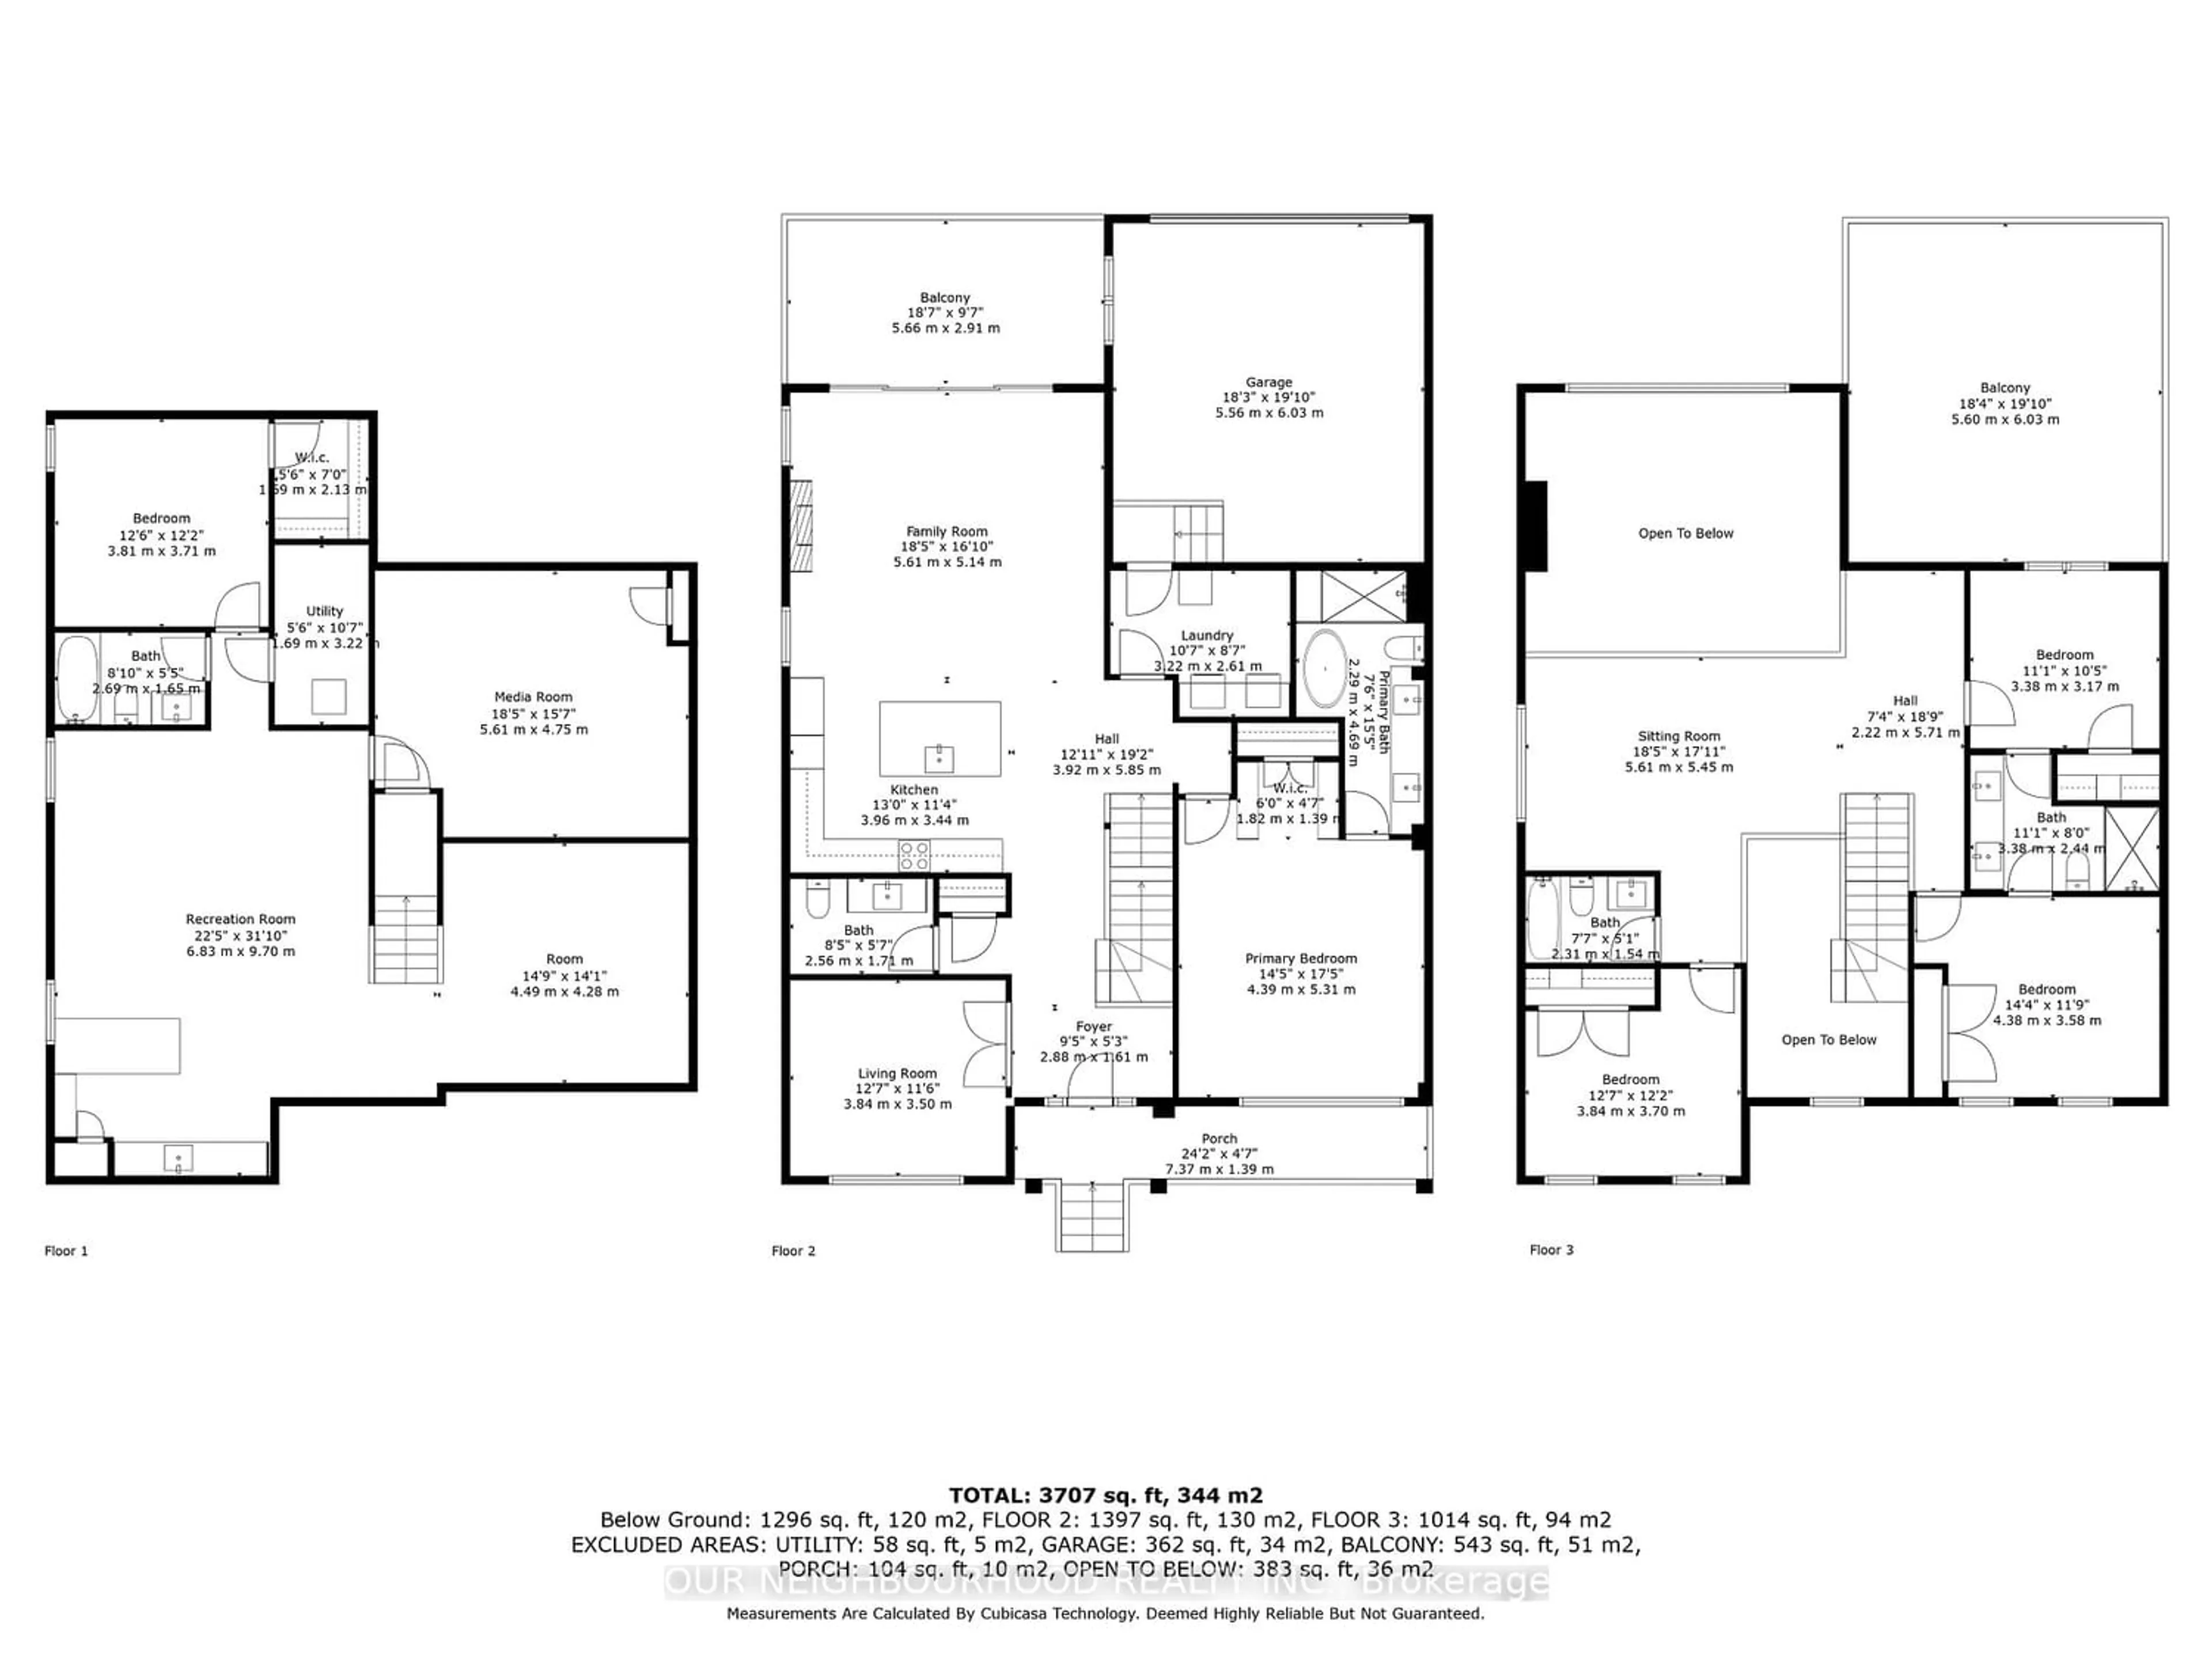 Floor plan for 327 Ridout St, Port Hope Ontario L1A 3L6